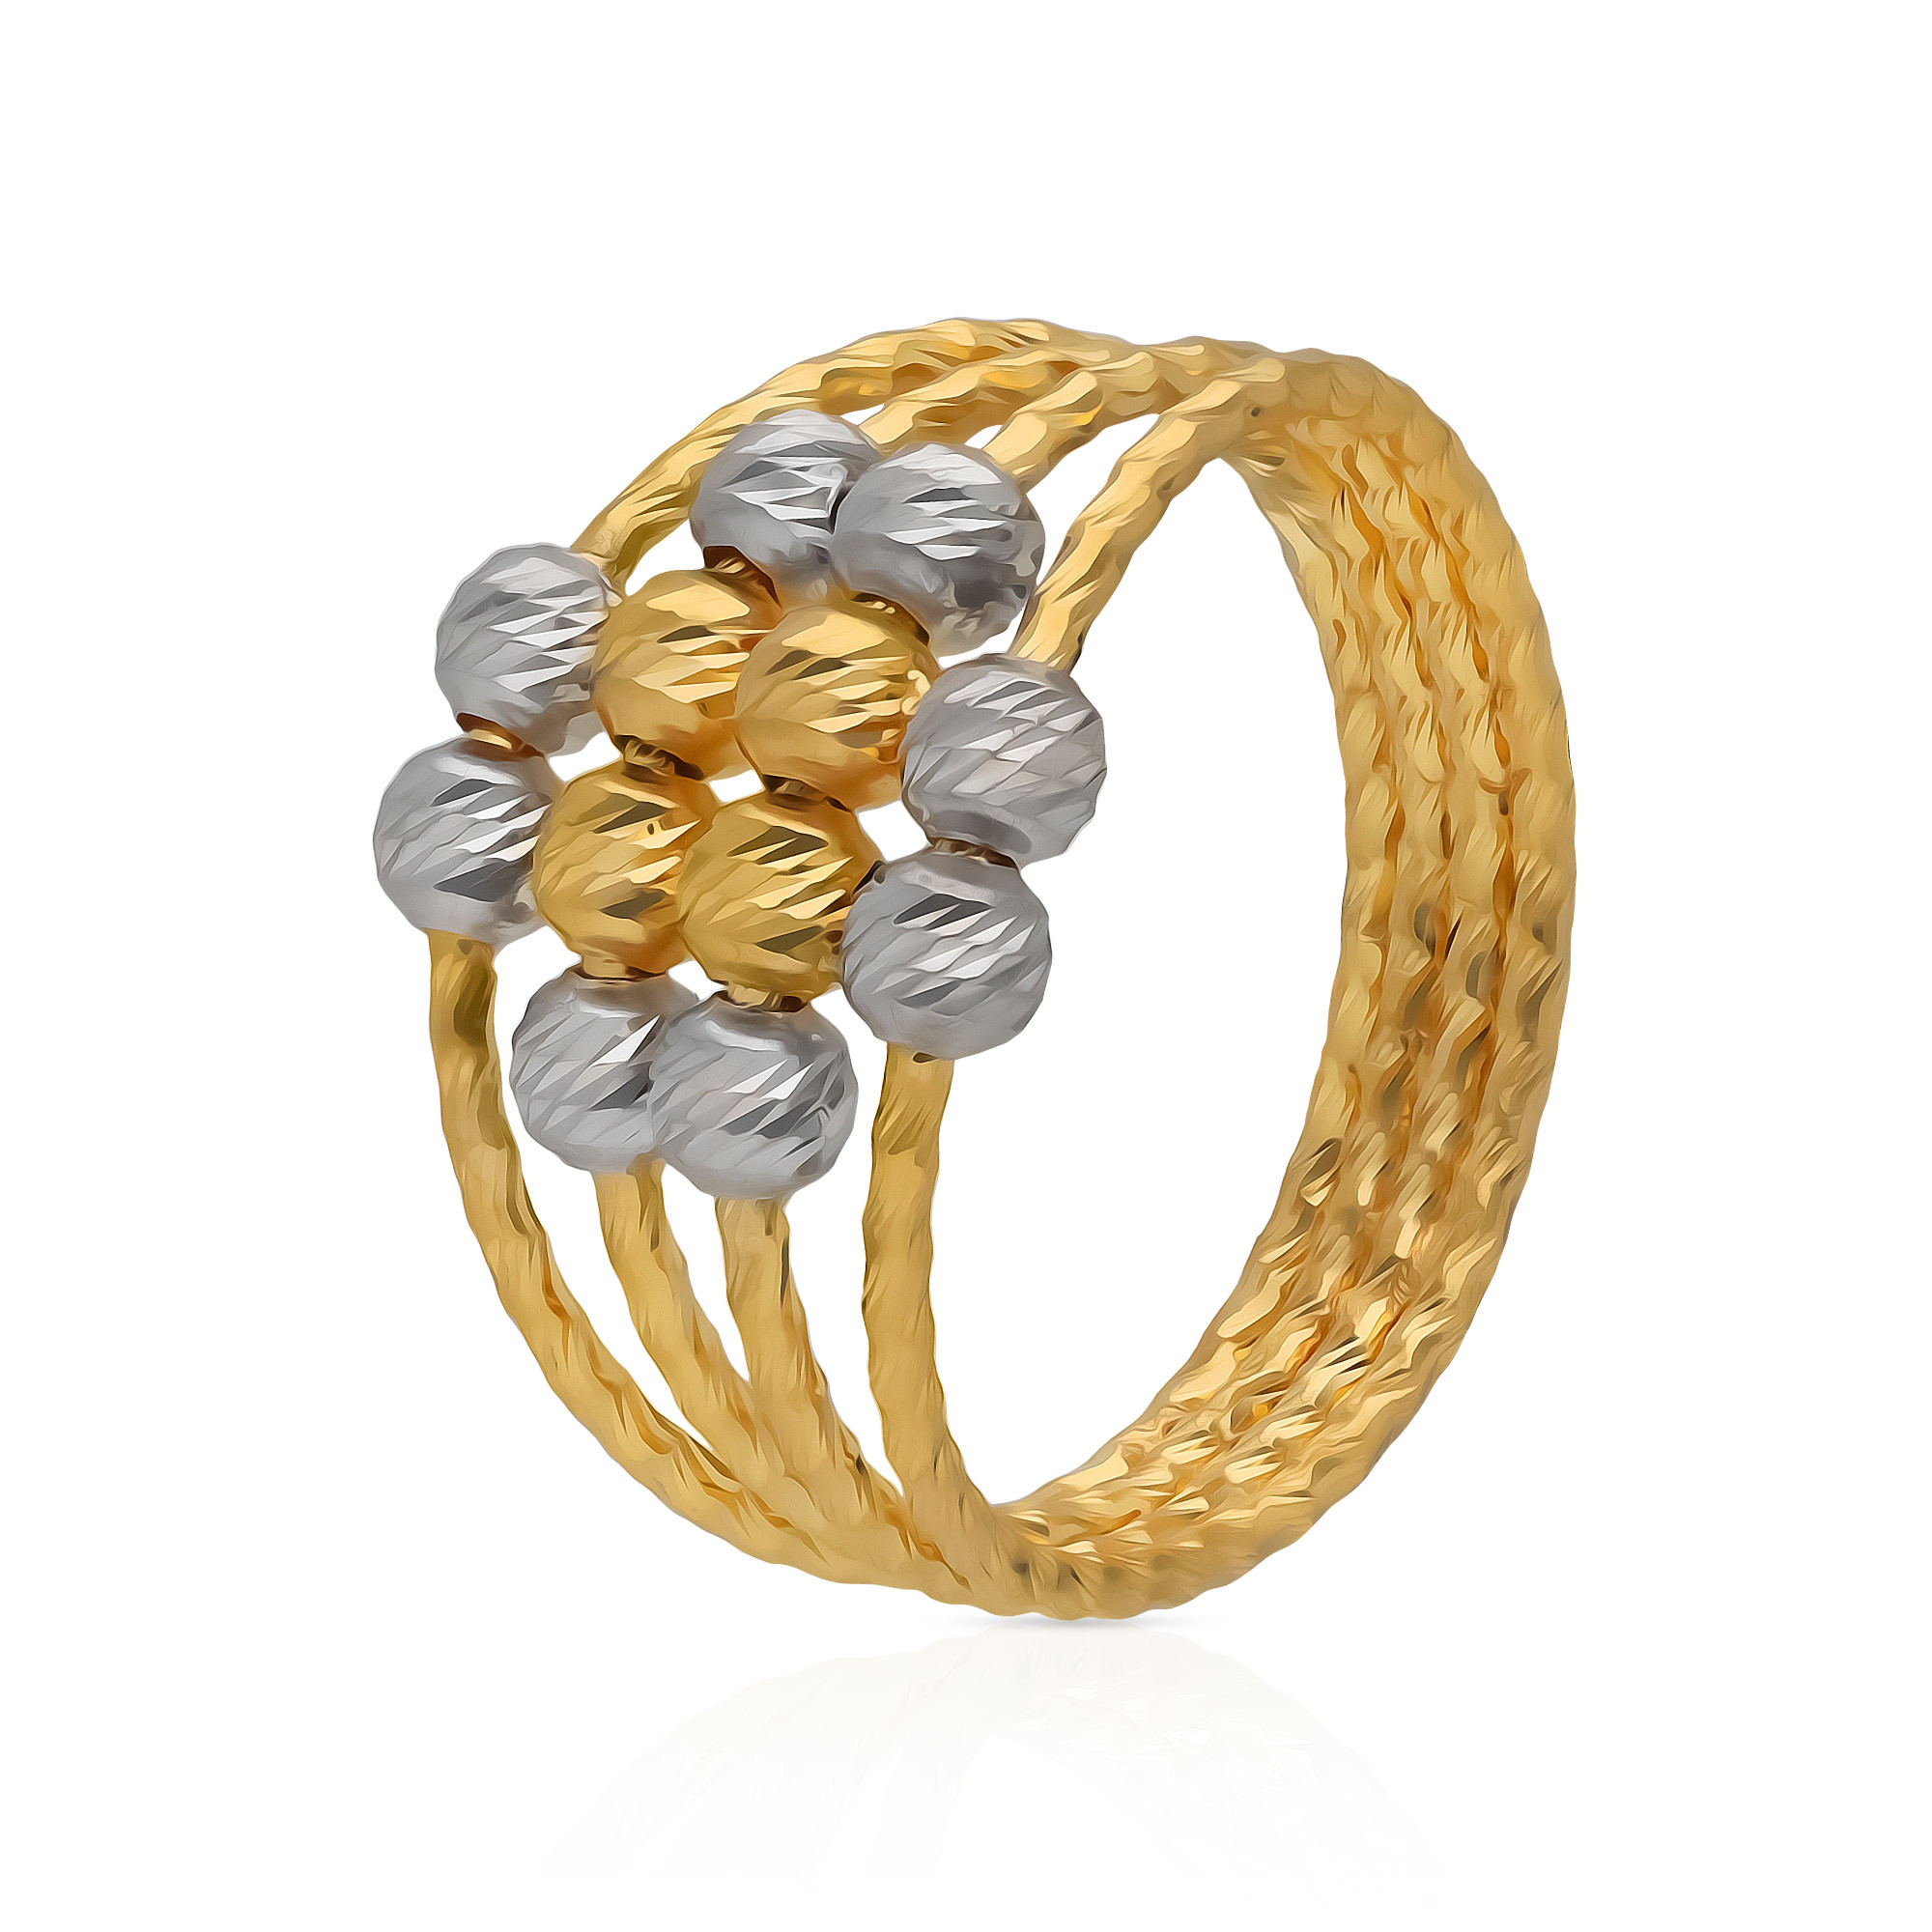 malabar Princess Festival Jewellery Rings, Size: 7.7mm at Rs 650 in Delhi